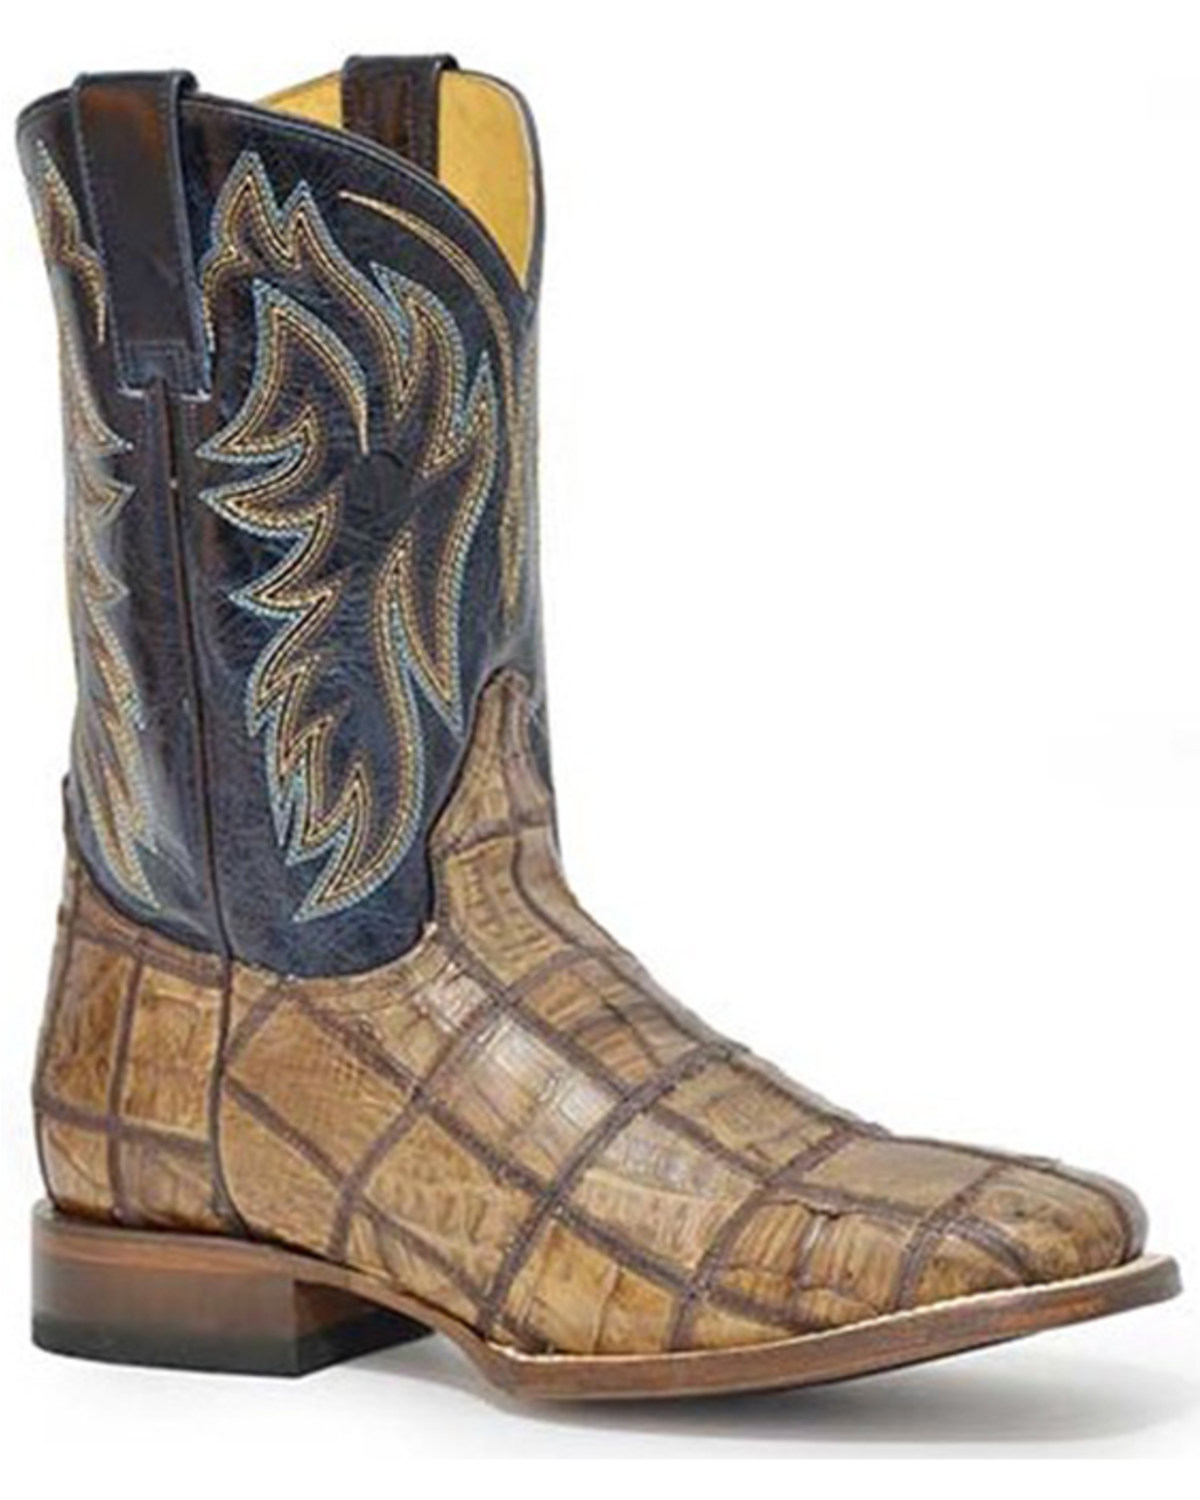 Roper Men's Caiman Check Patchwork Exotic Western Boots - Broad Square Toe